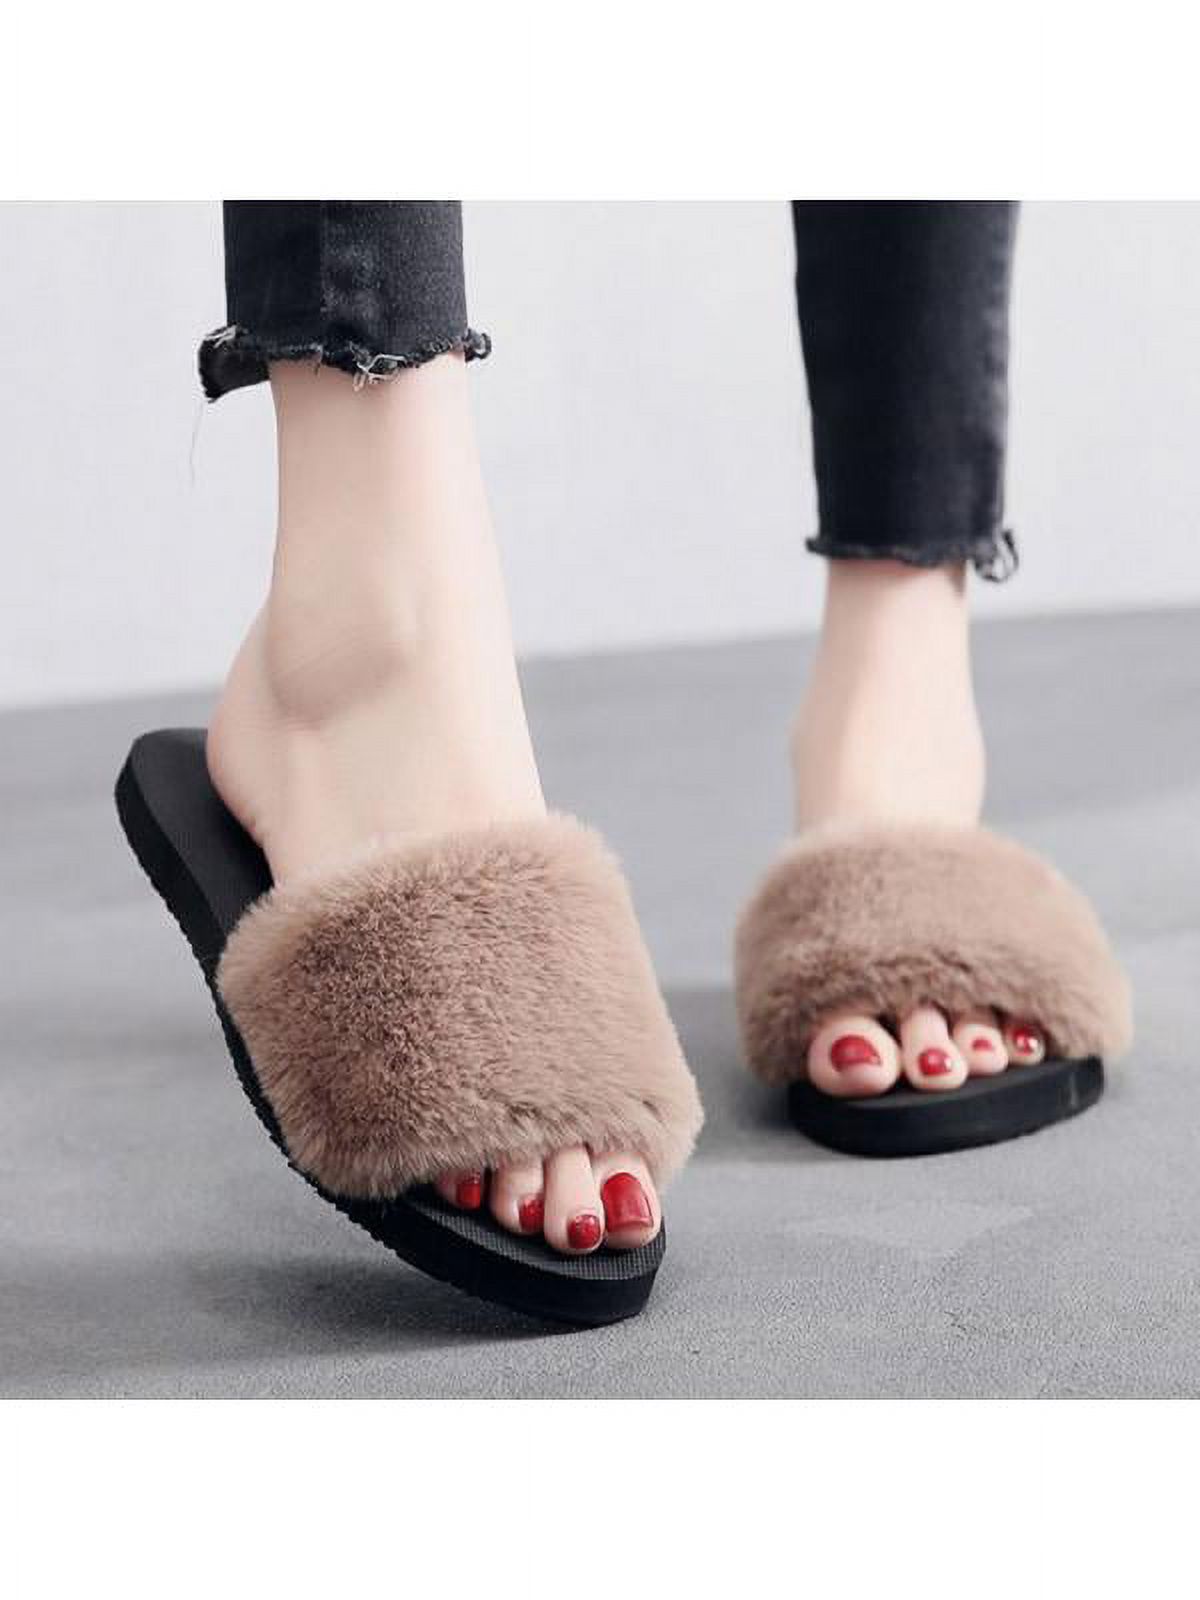 Ropalia Womens Winter Fur Solid Color Slippers Home Anti-Slip Warm Cotton Trailer Shoes Ladies Casual Shoes - image 2 of 3